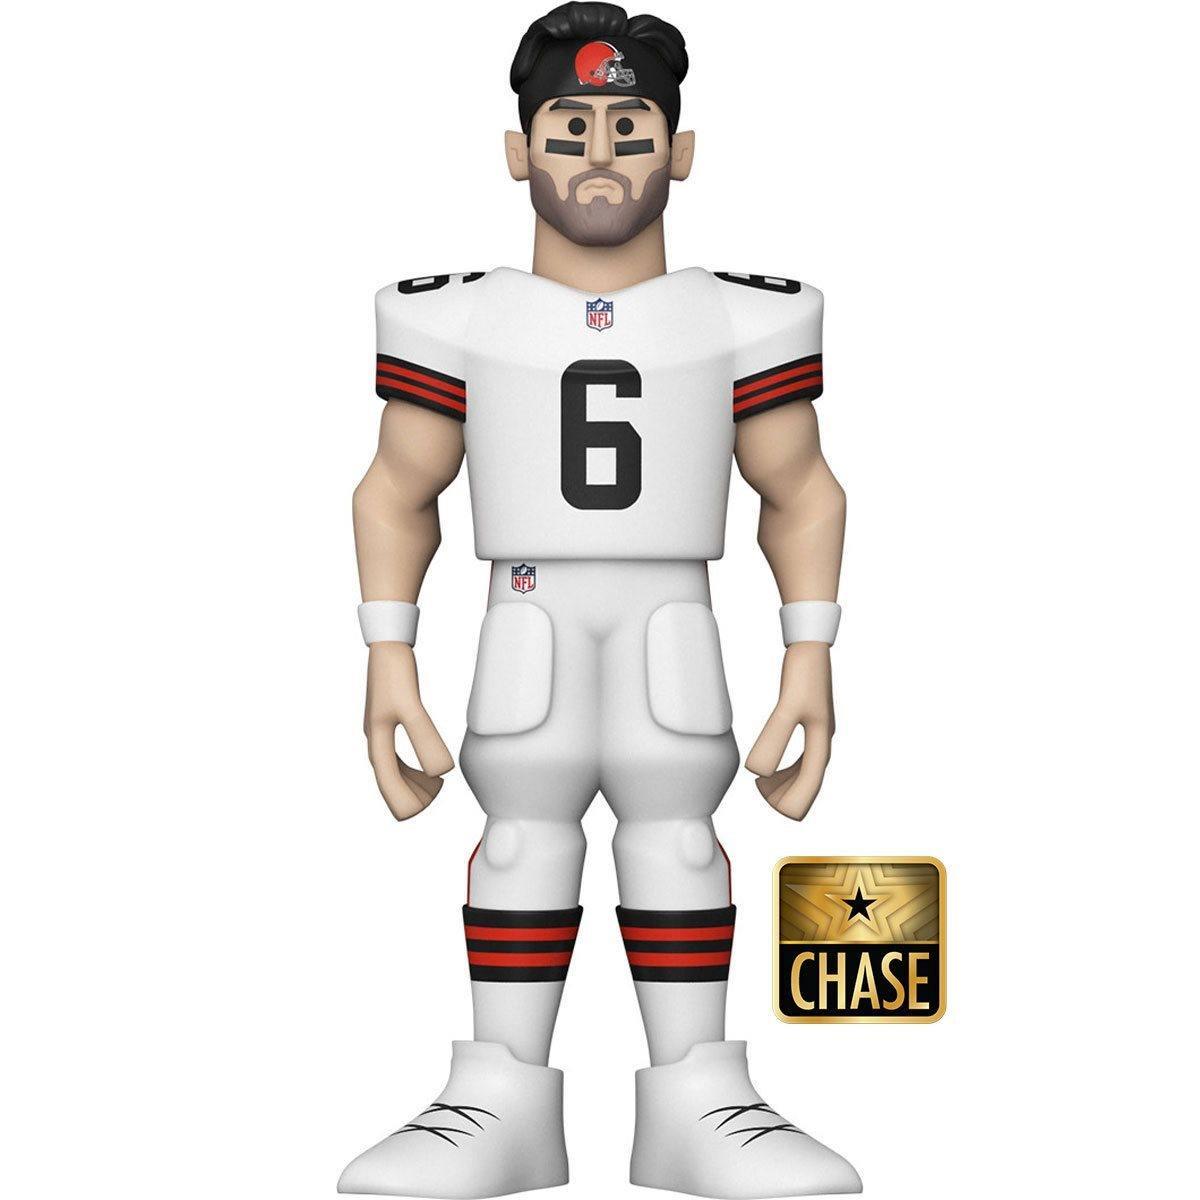 FUN57285 NFL: Browns - Baker Mayfield (with chase) 5" Vinyl Gold - Funko - Titan Pop Culture